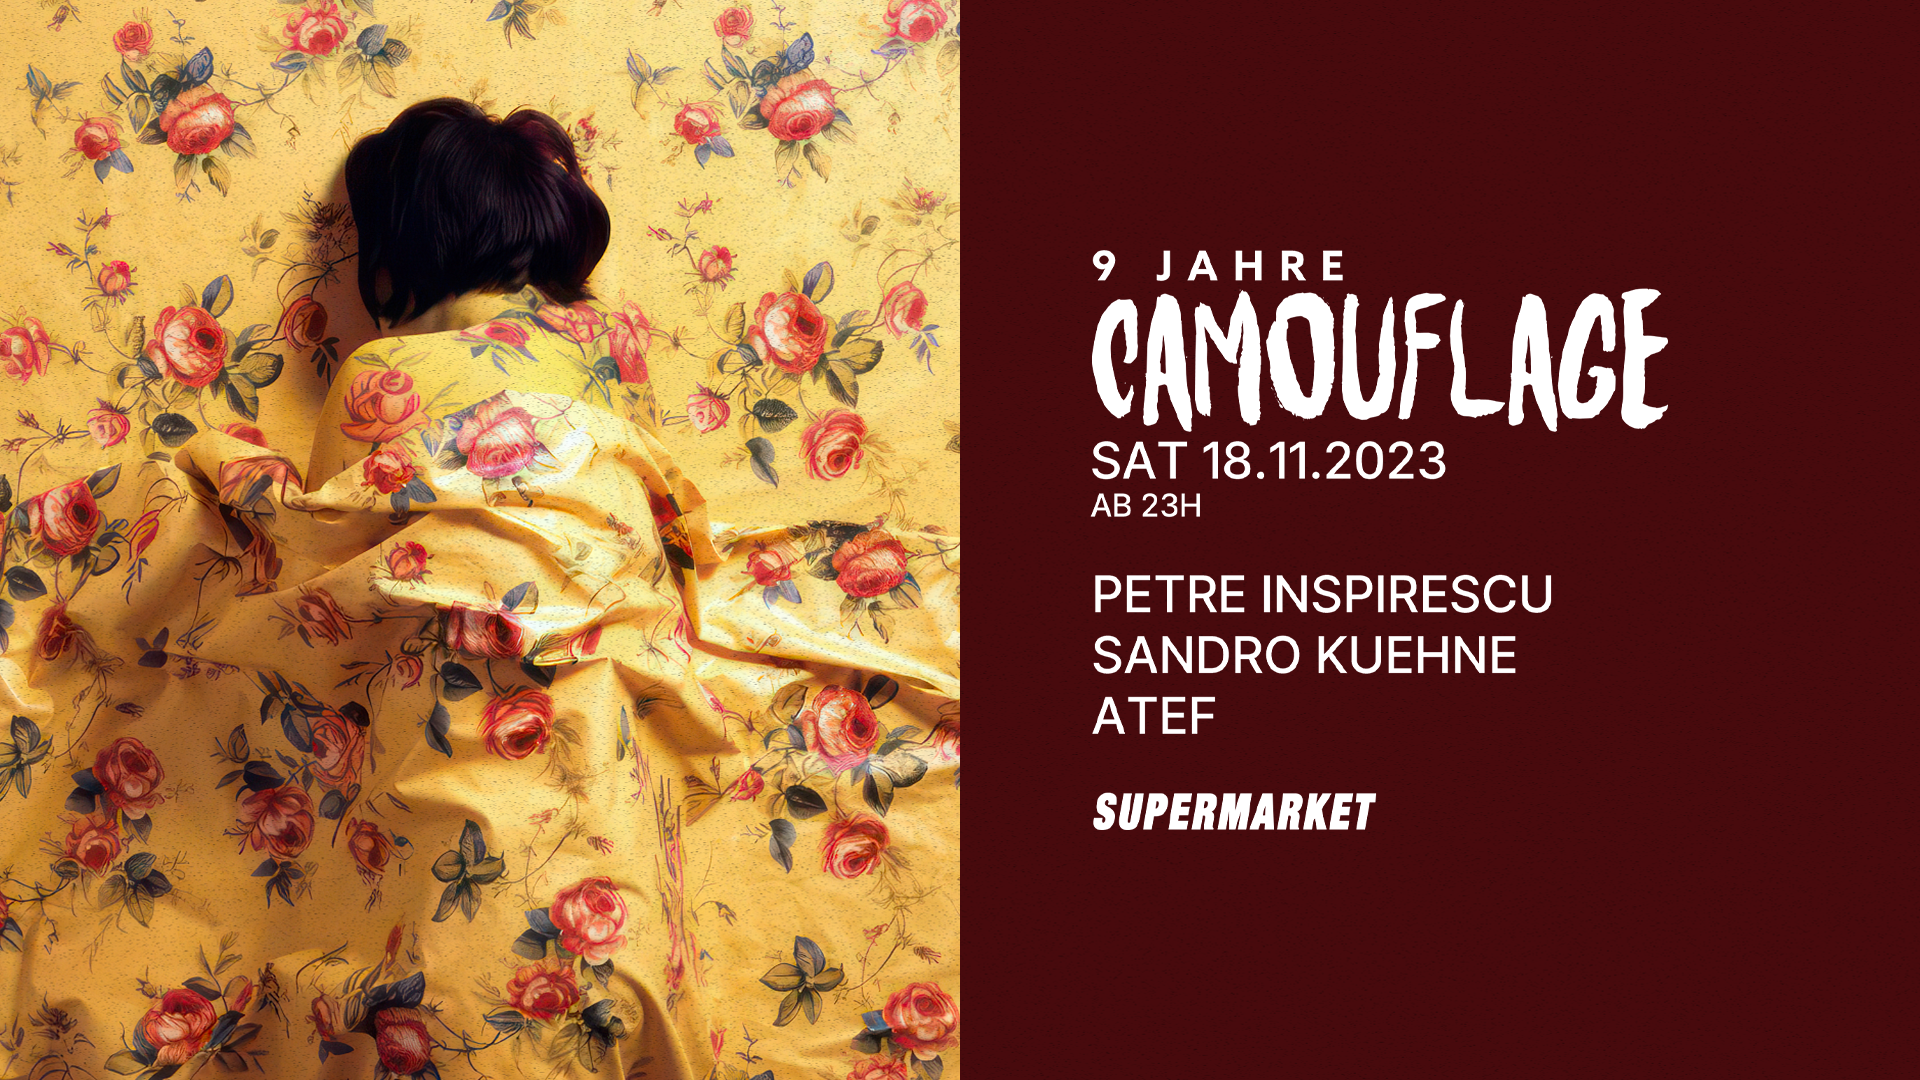 9 Jahre Camouflage with Petre Inspirescu - フライヤー表